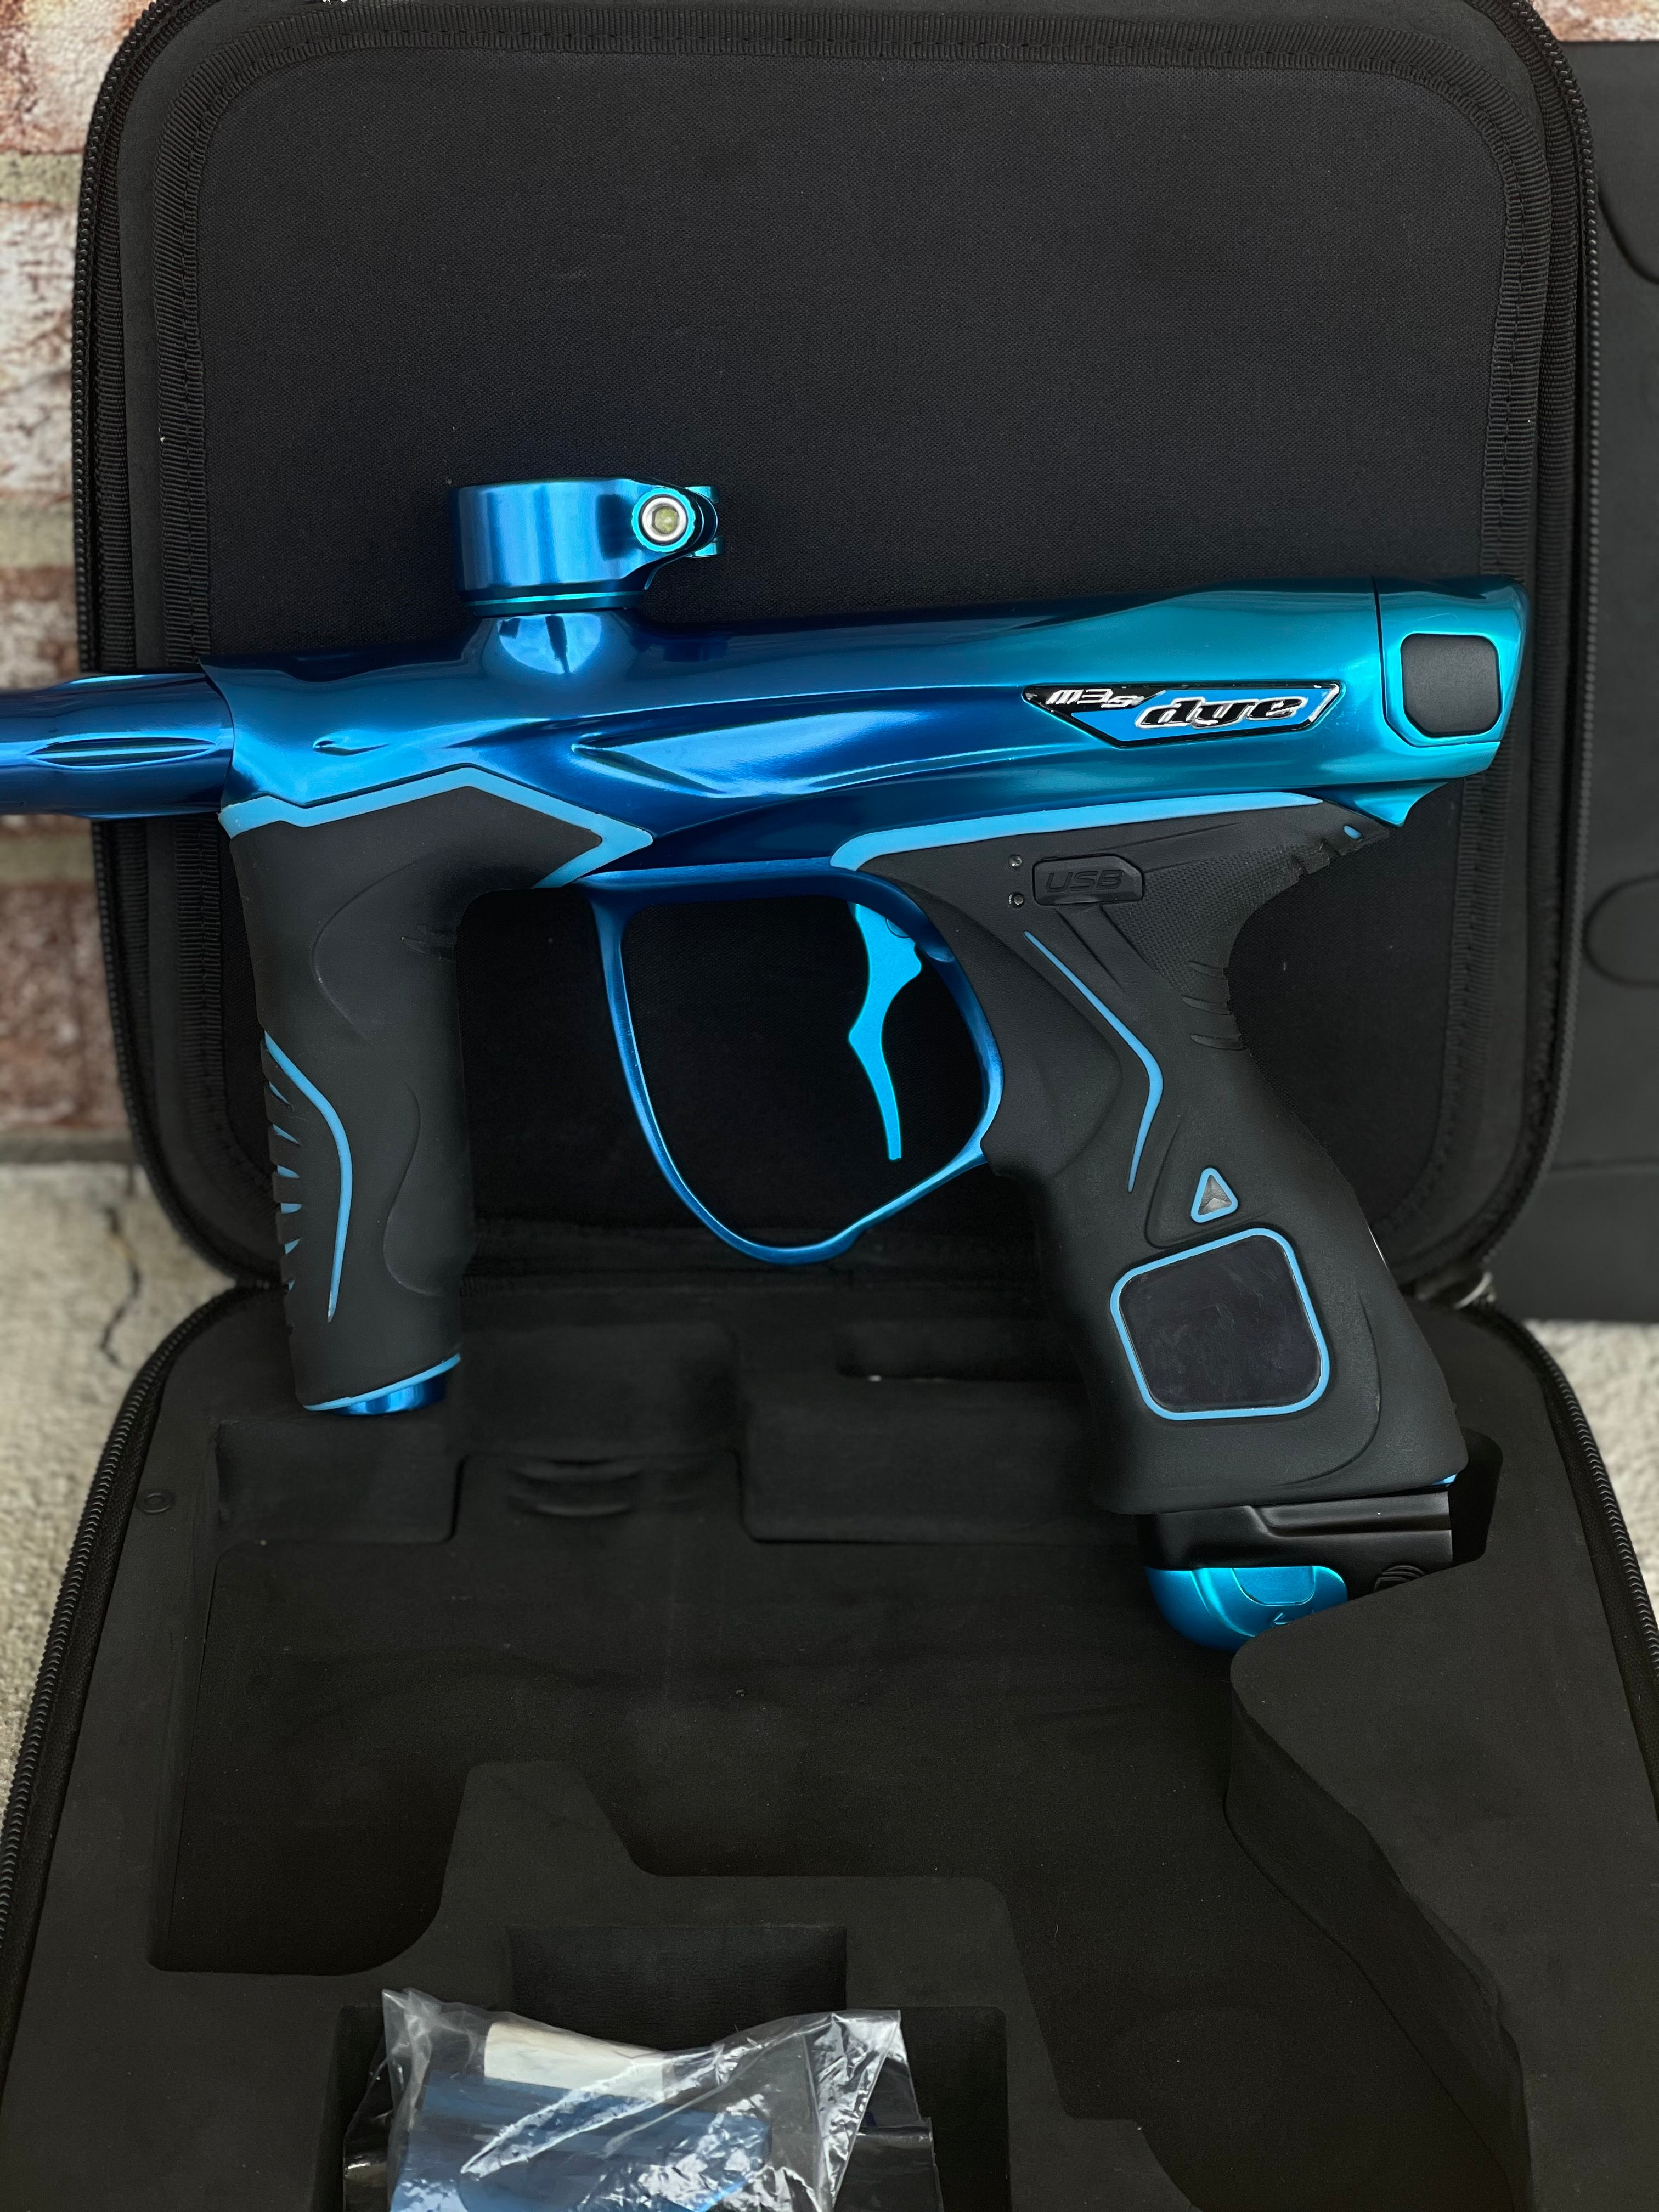 Used Dye M3S Paintball Marker - Deep Waters